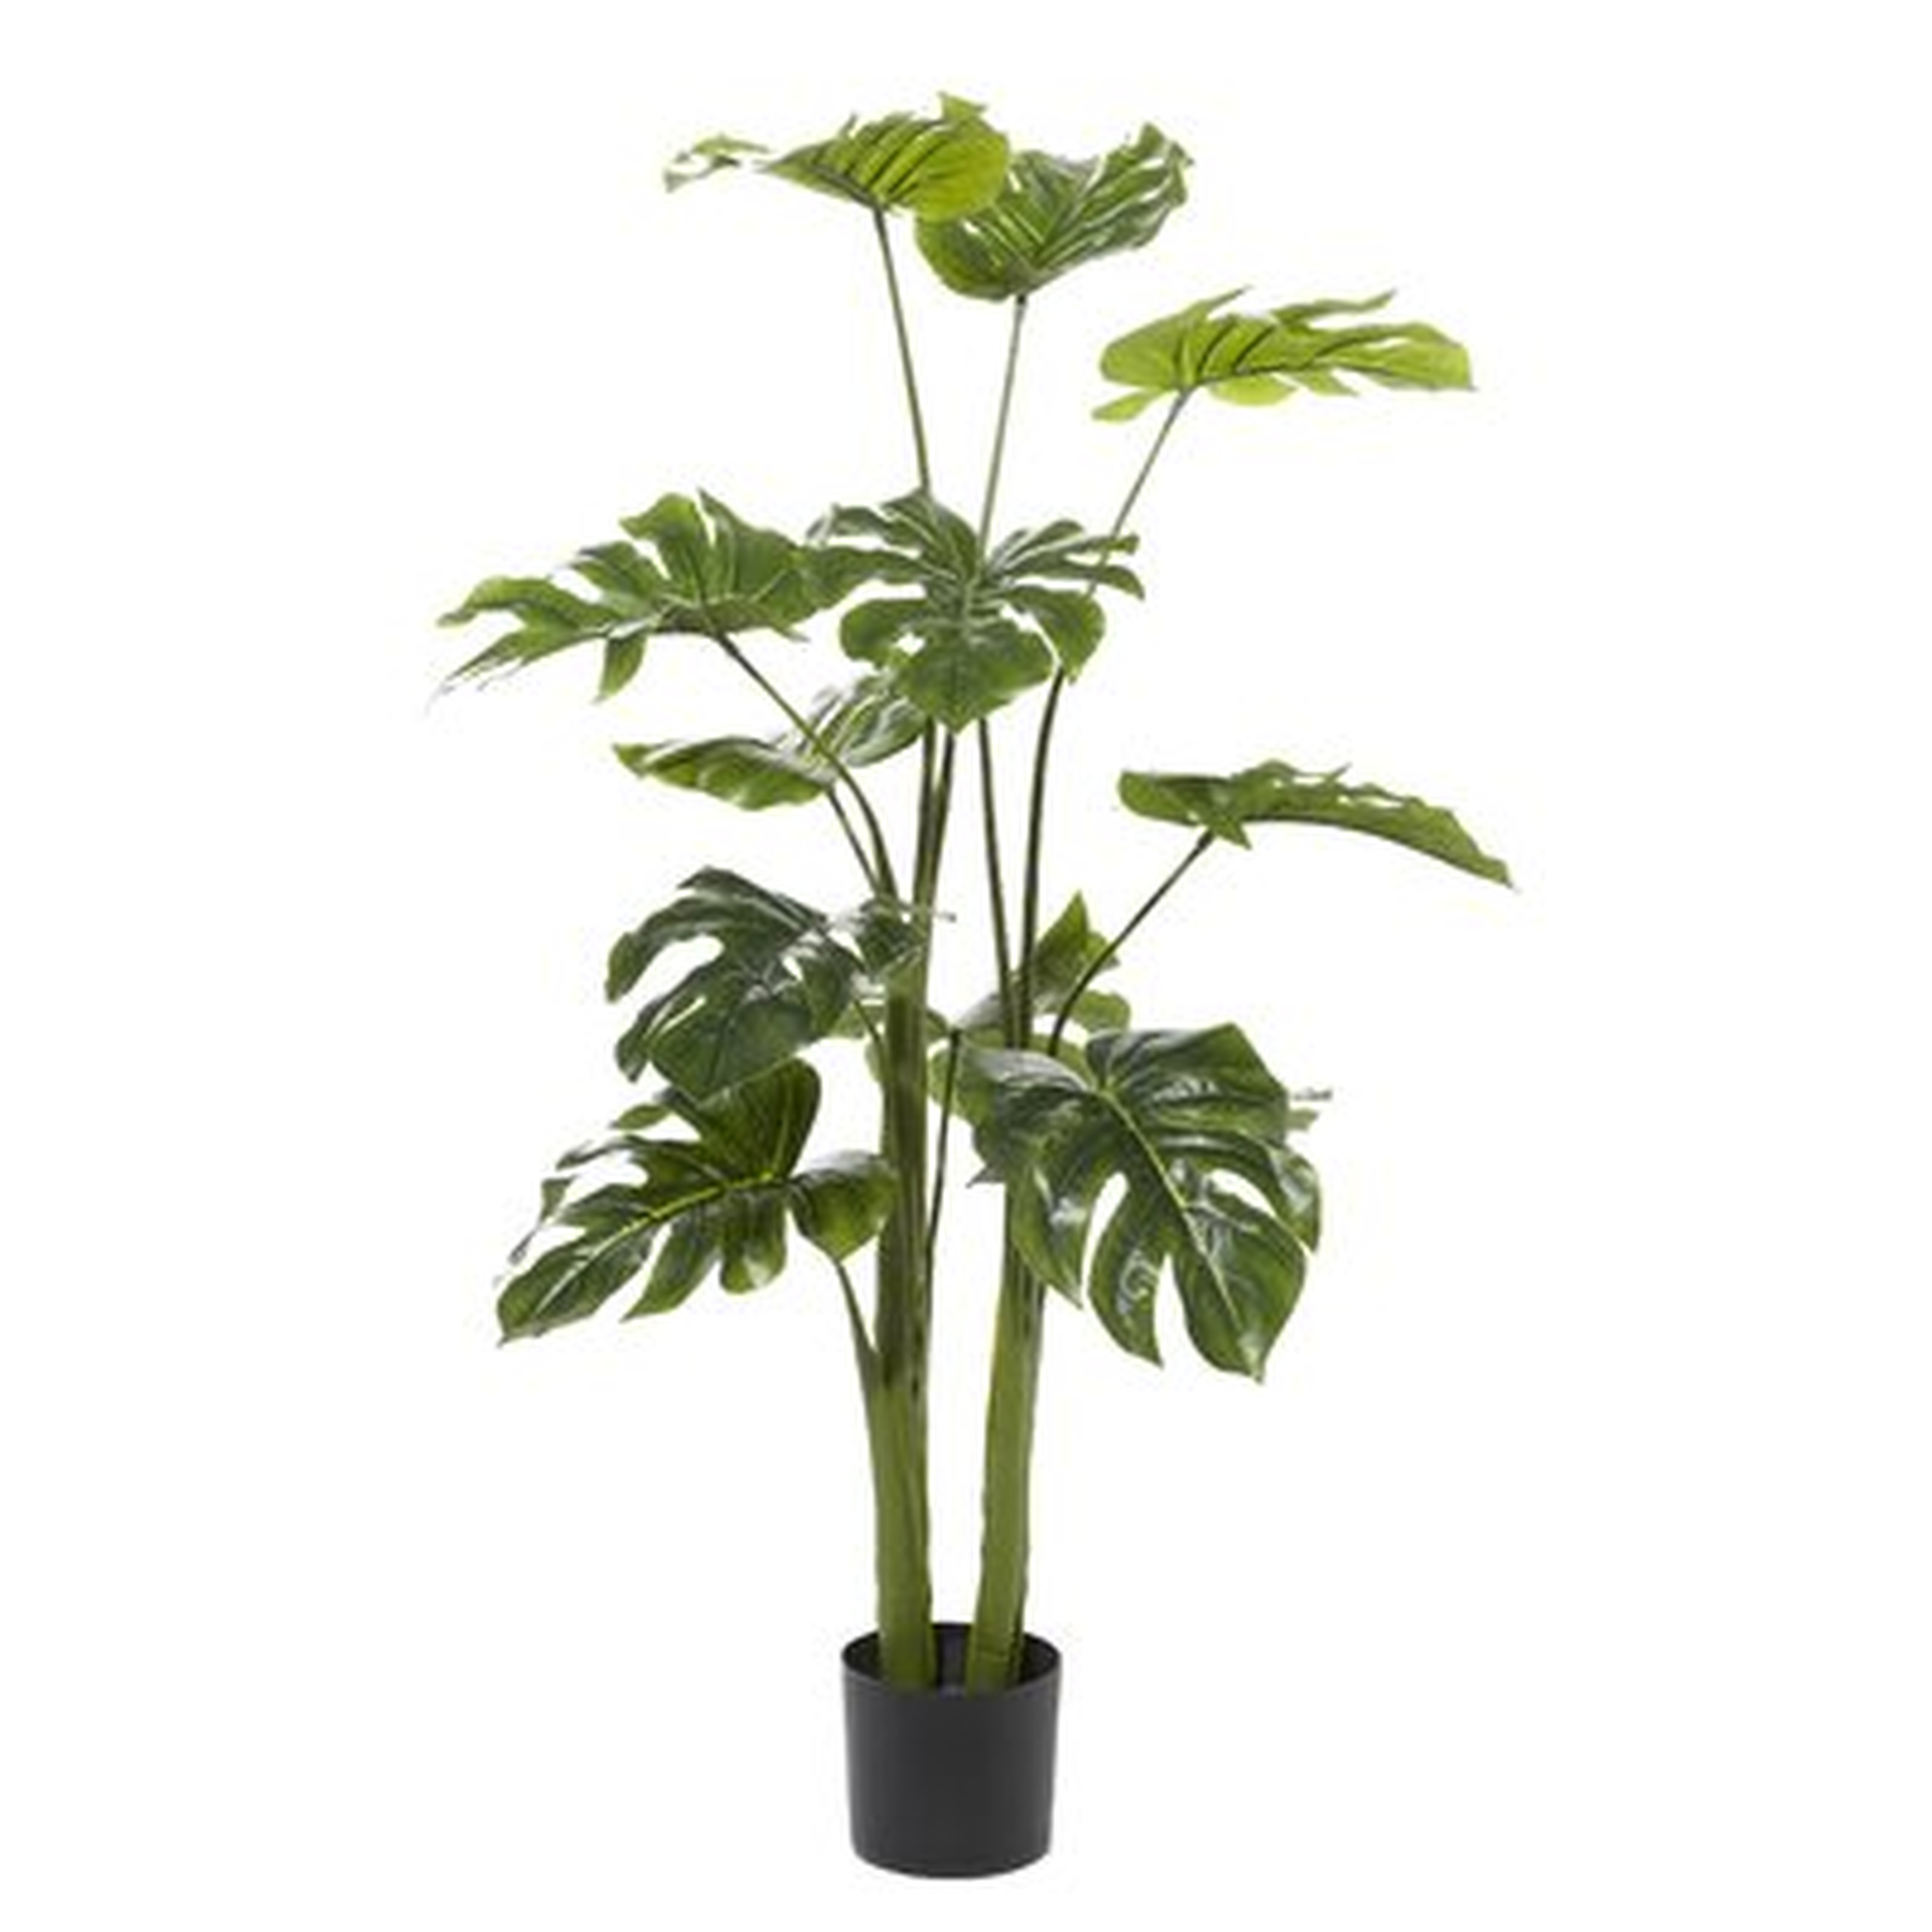 48" Artificial Swiss cheese plant Plant in Pot - Wayfair